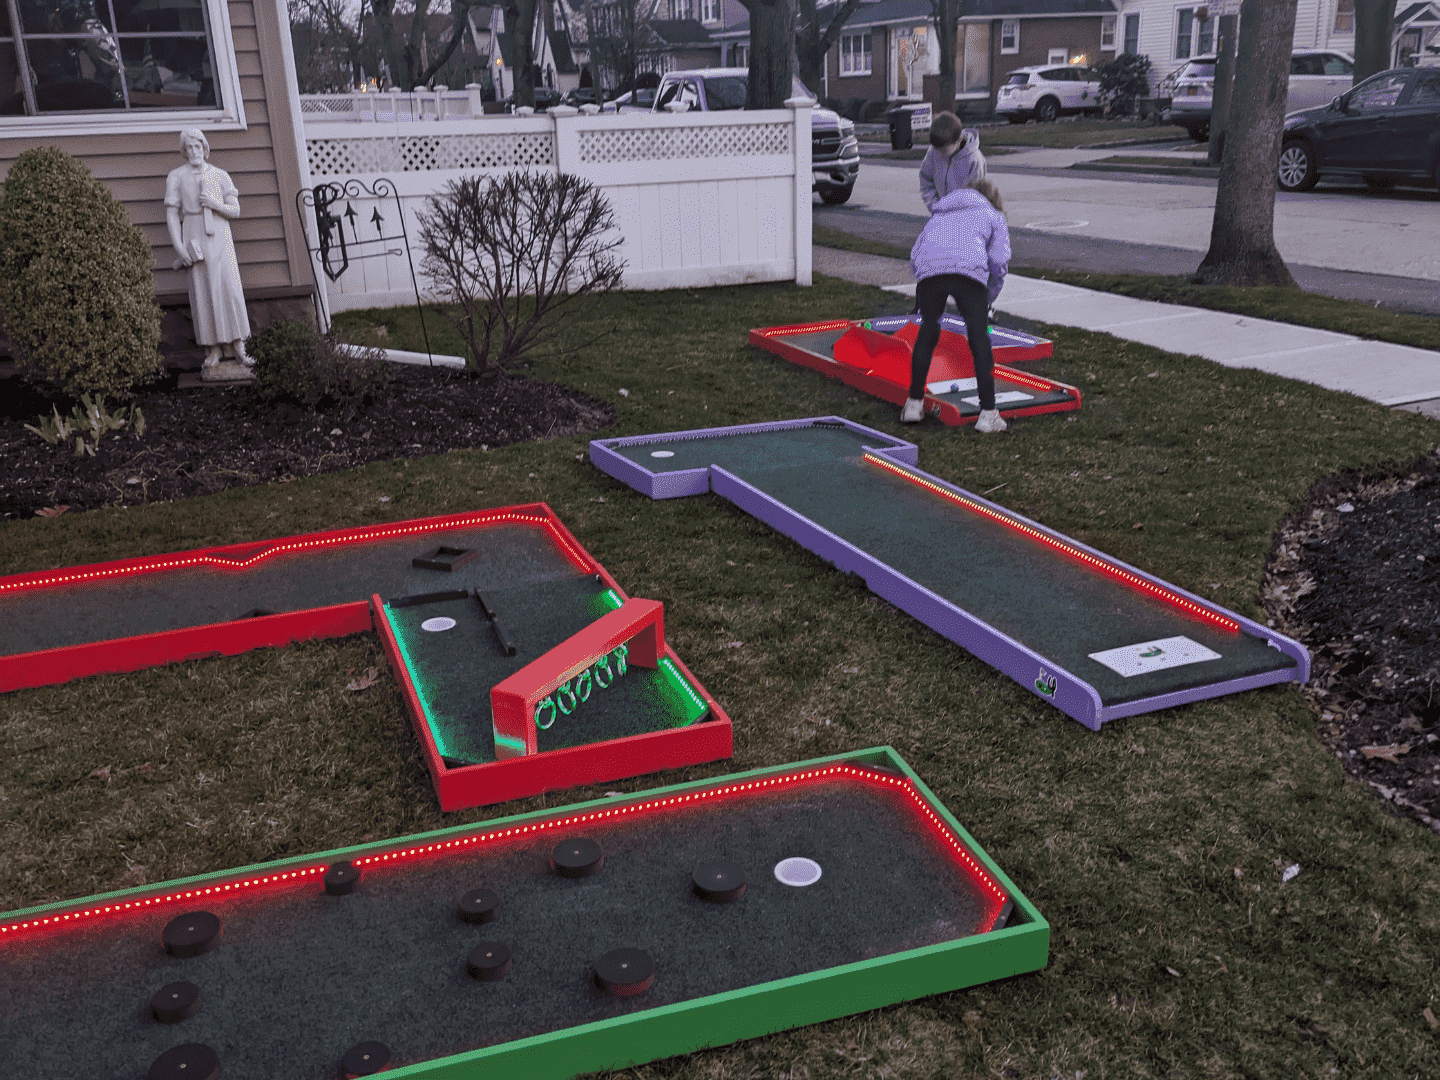 A portable LED mini golf course laid out on grass. Two children are playing on the boards towards the far right of the image. 